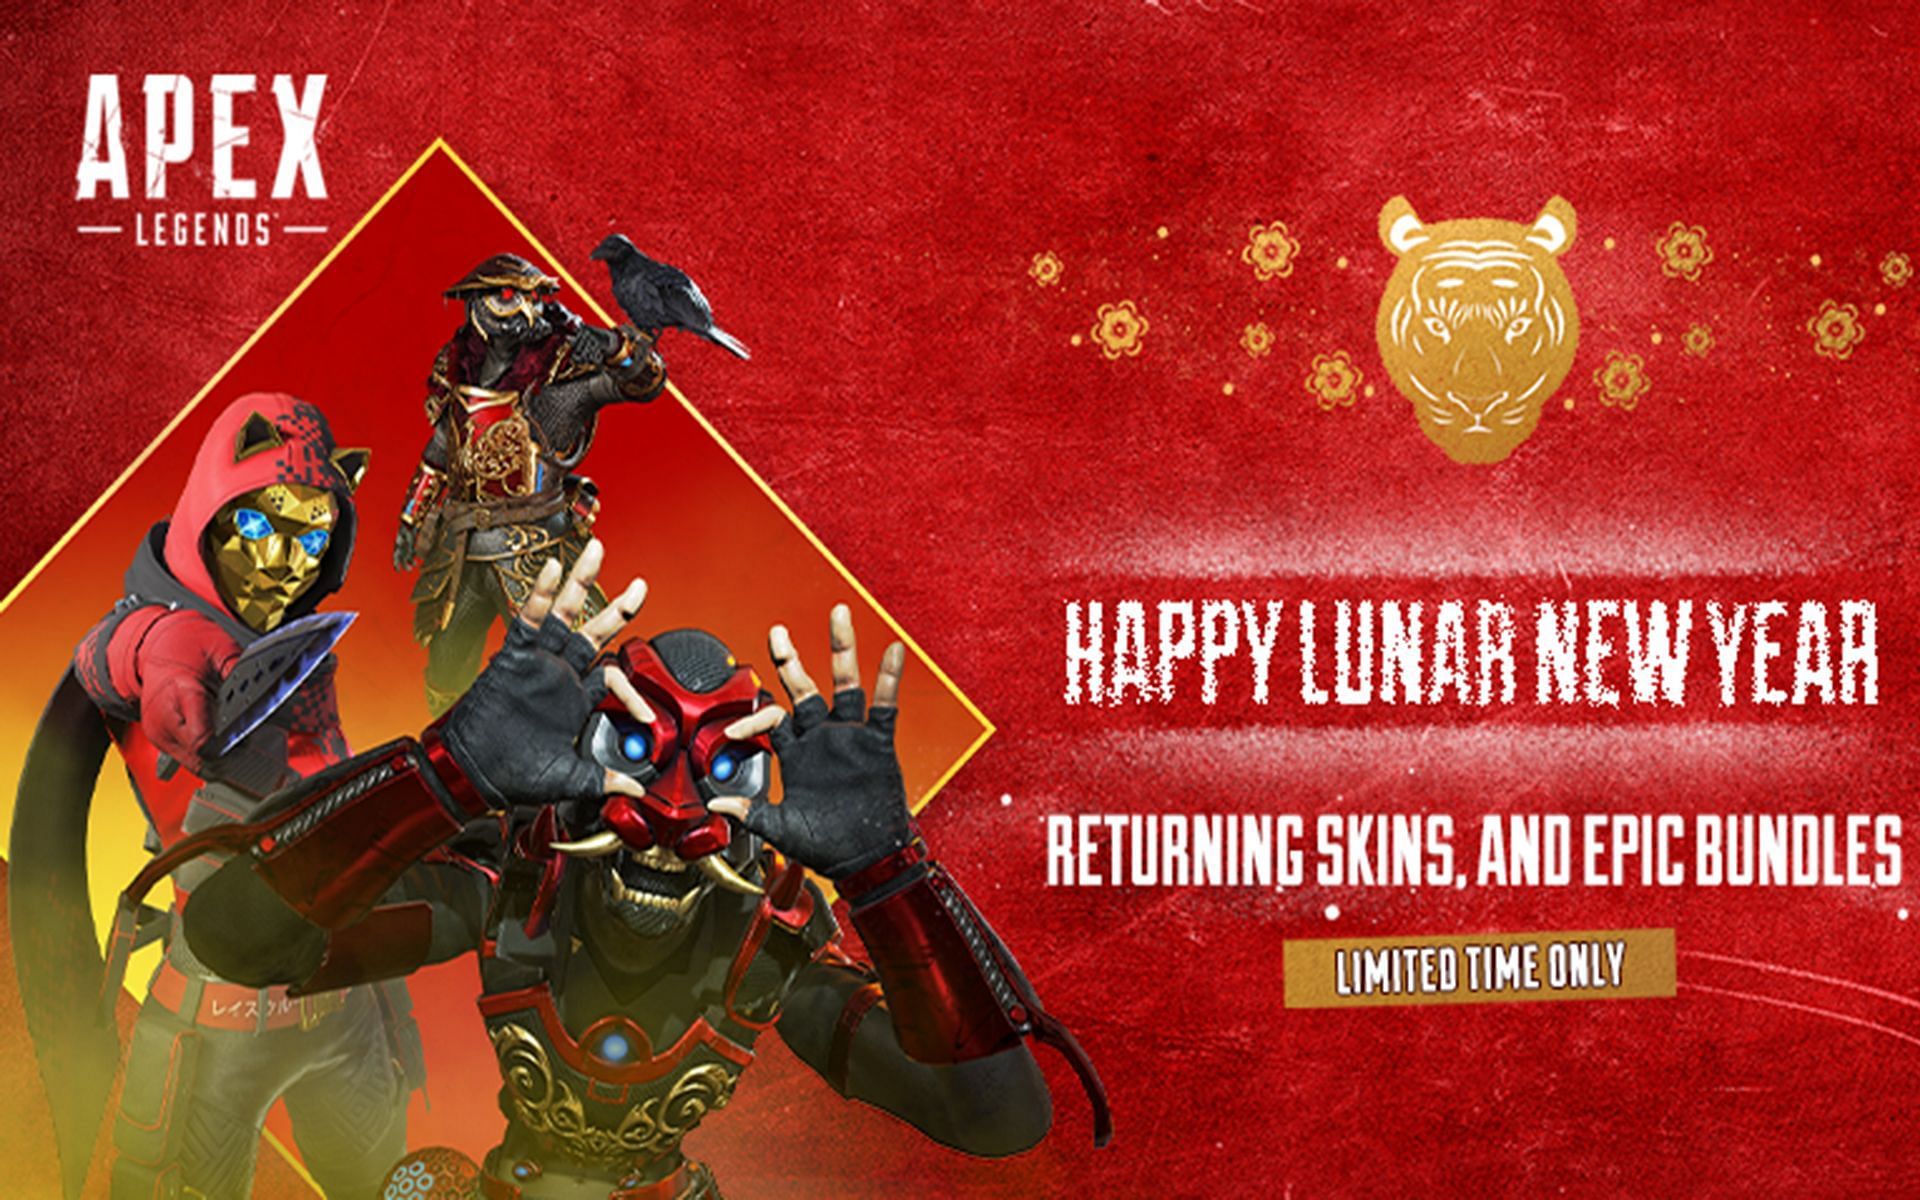 Apex Legends has brought Lunar New Year sale &amp; bundles for players to enjoy (Image via Steam)